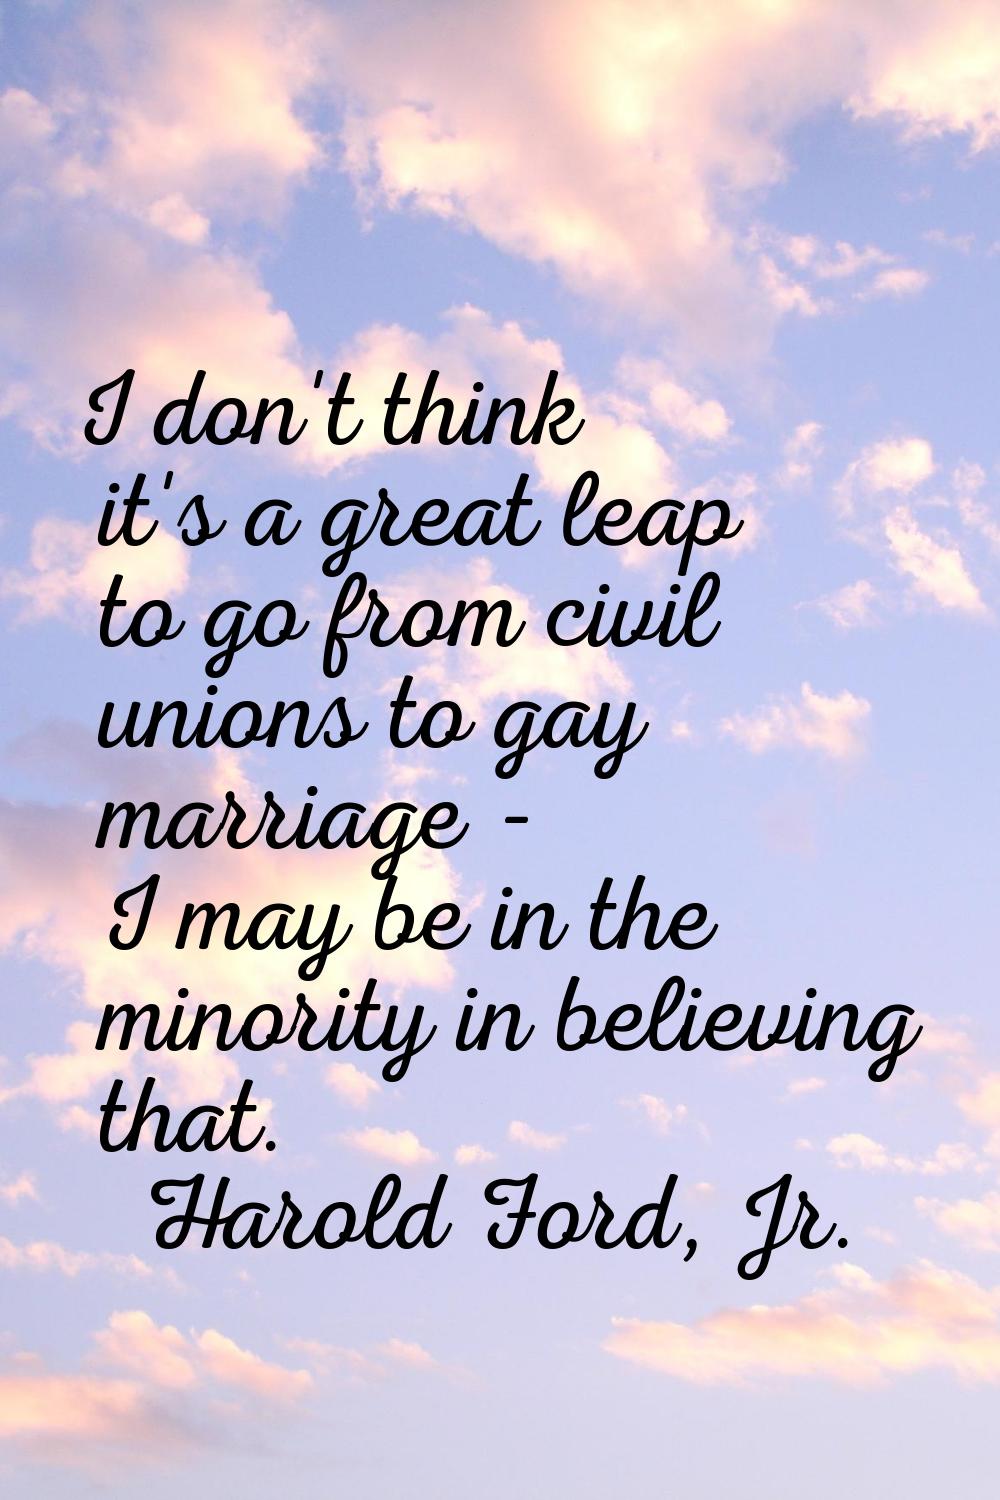 I don't think it's a great leap to go from civil unions to gay marriage - I may be in the minority 